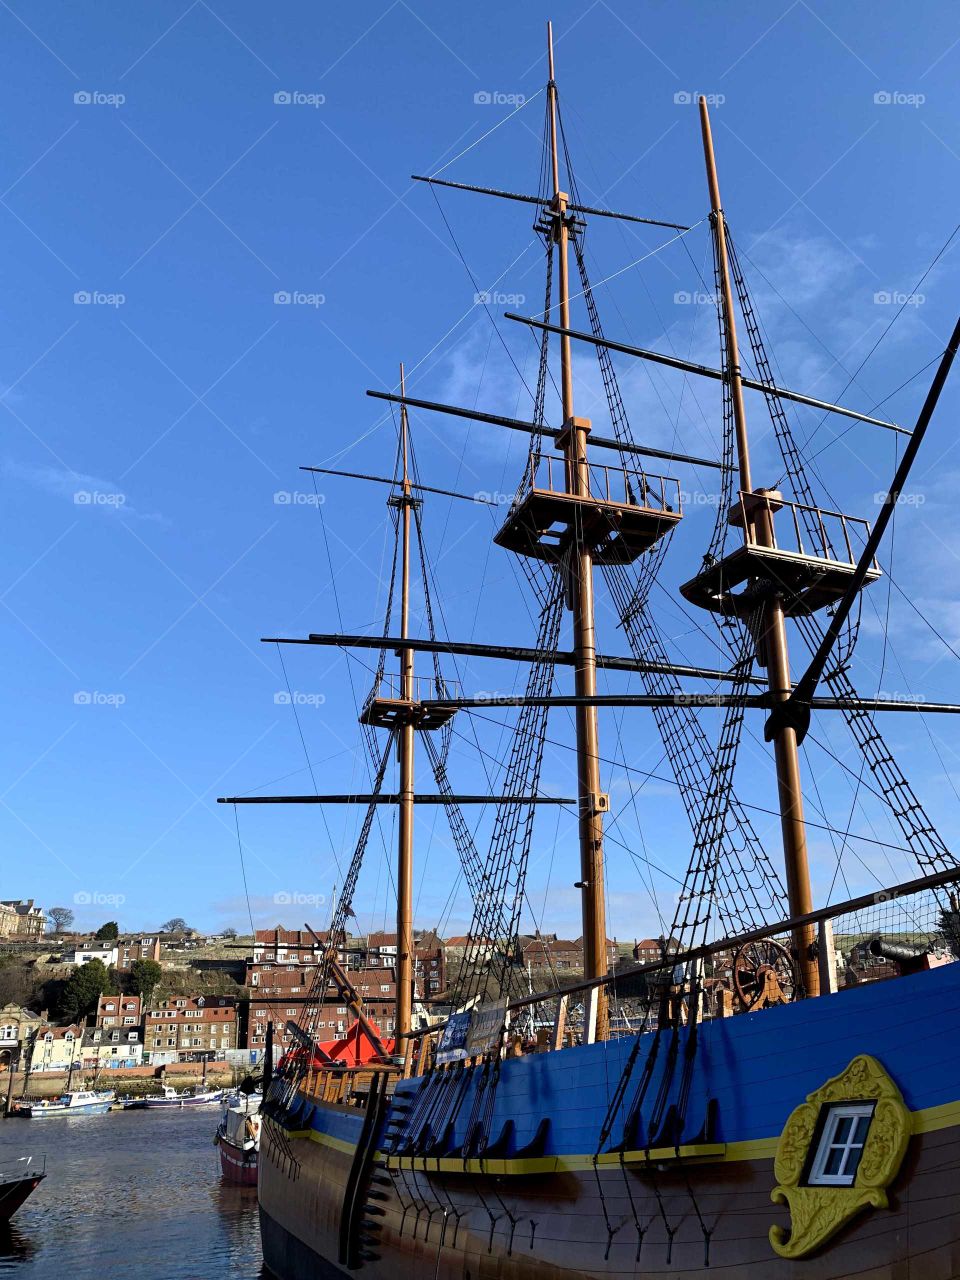 HMS Endeavour at Whitby harbour